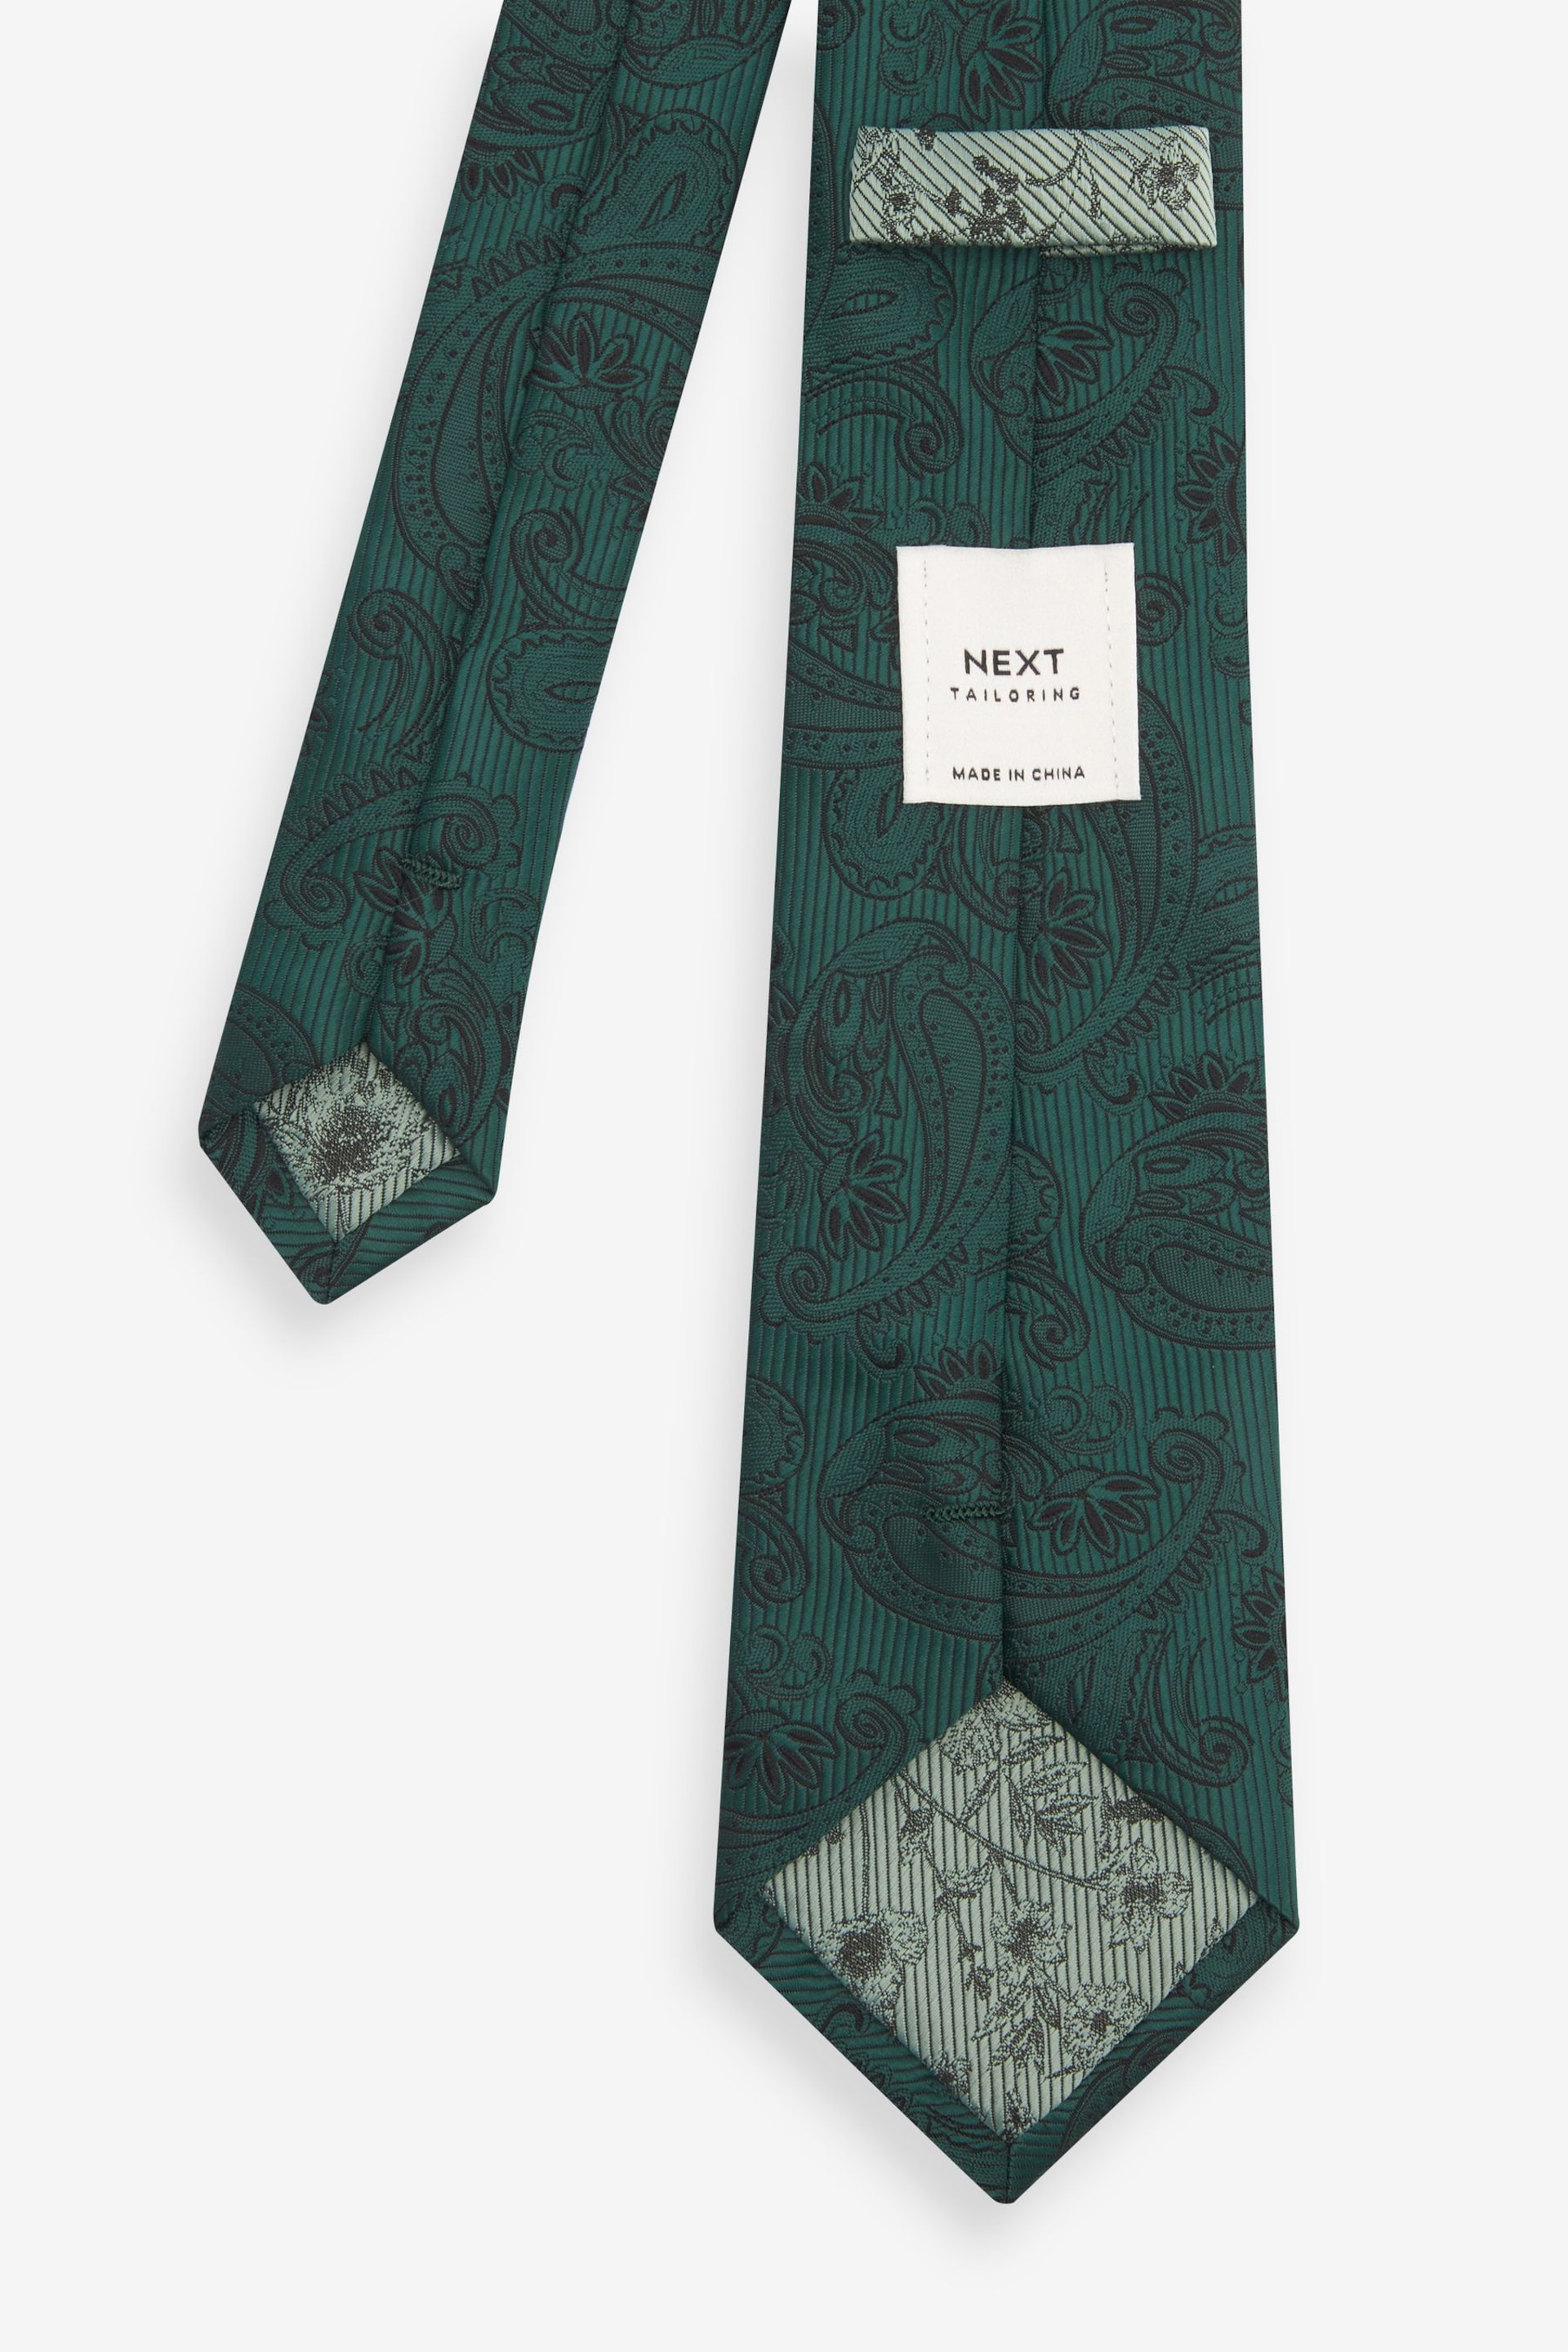 Forest Green Paisley Slim Tie Pocket Square And Lapel Pin Set - Image 2 of 5